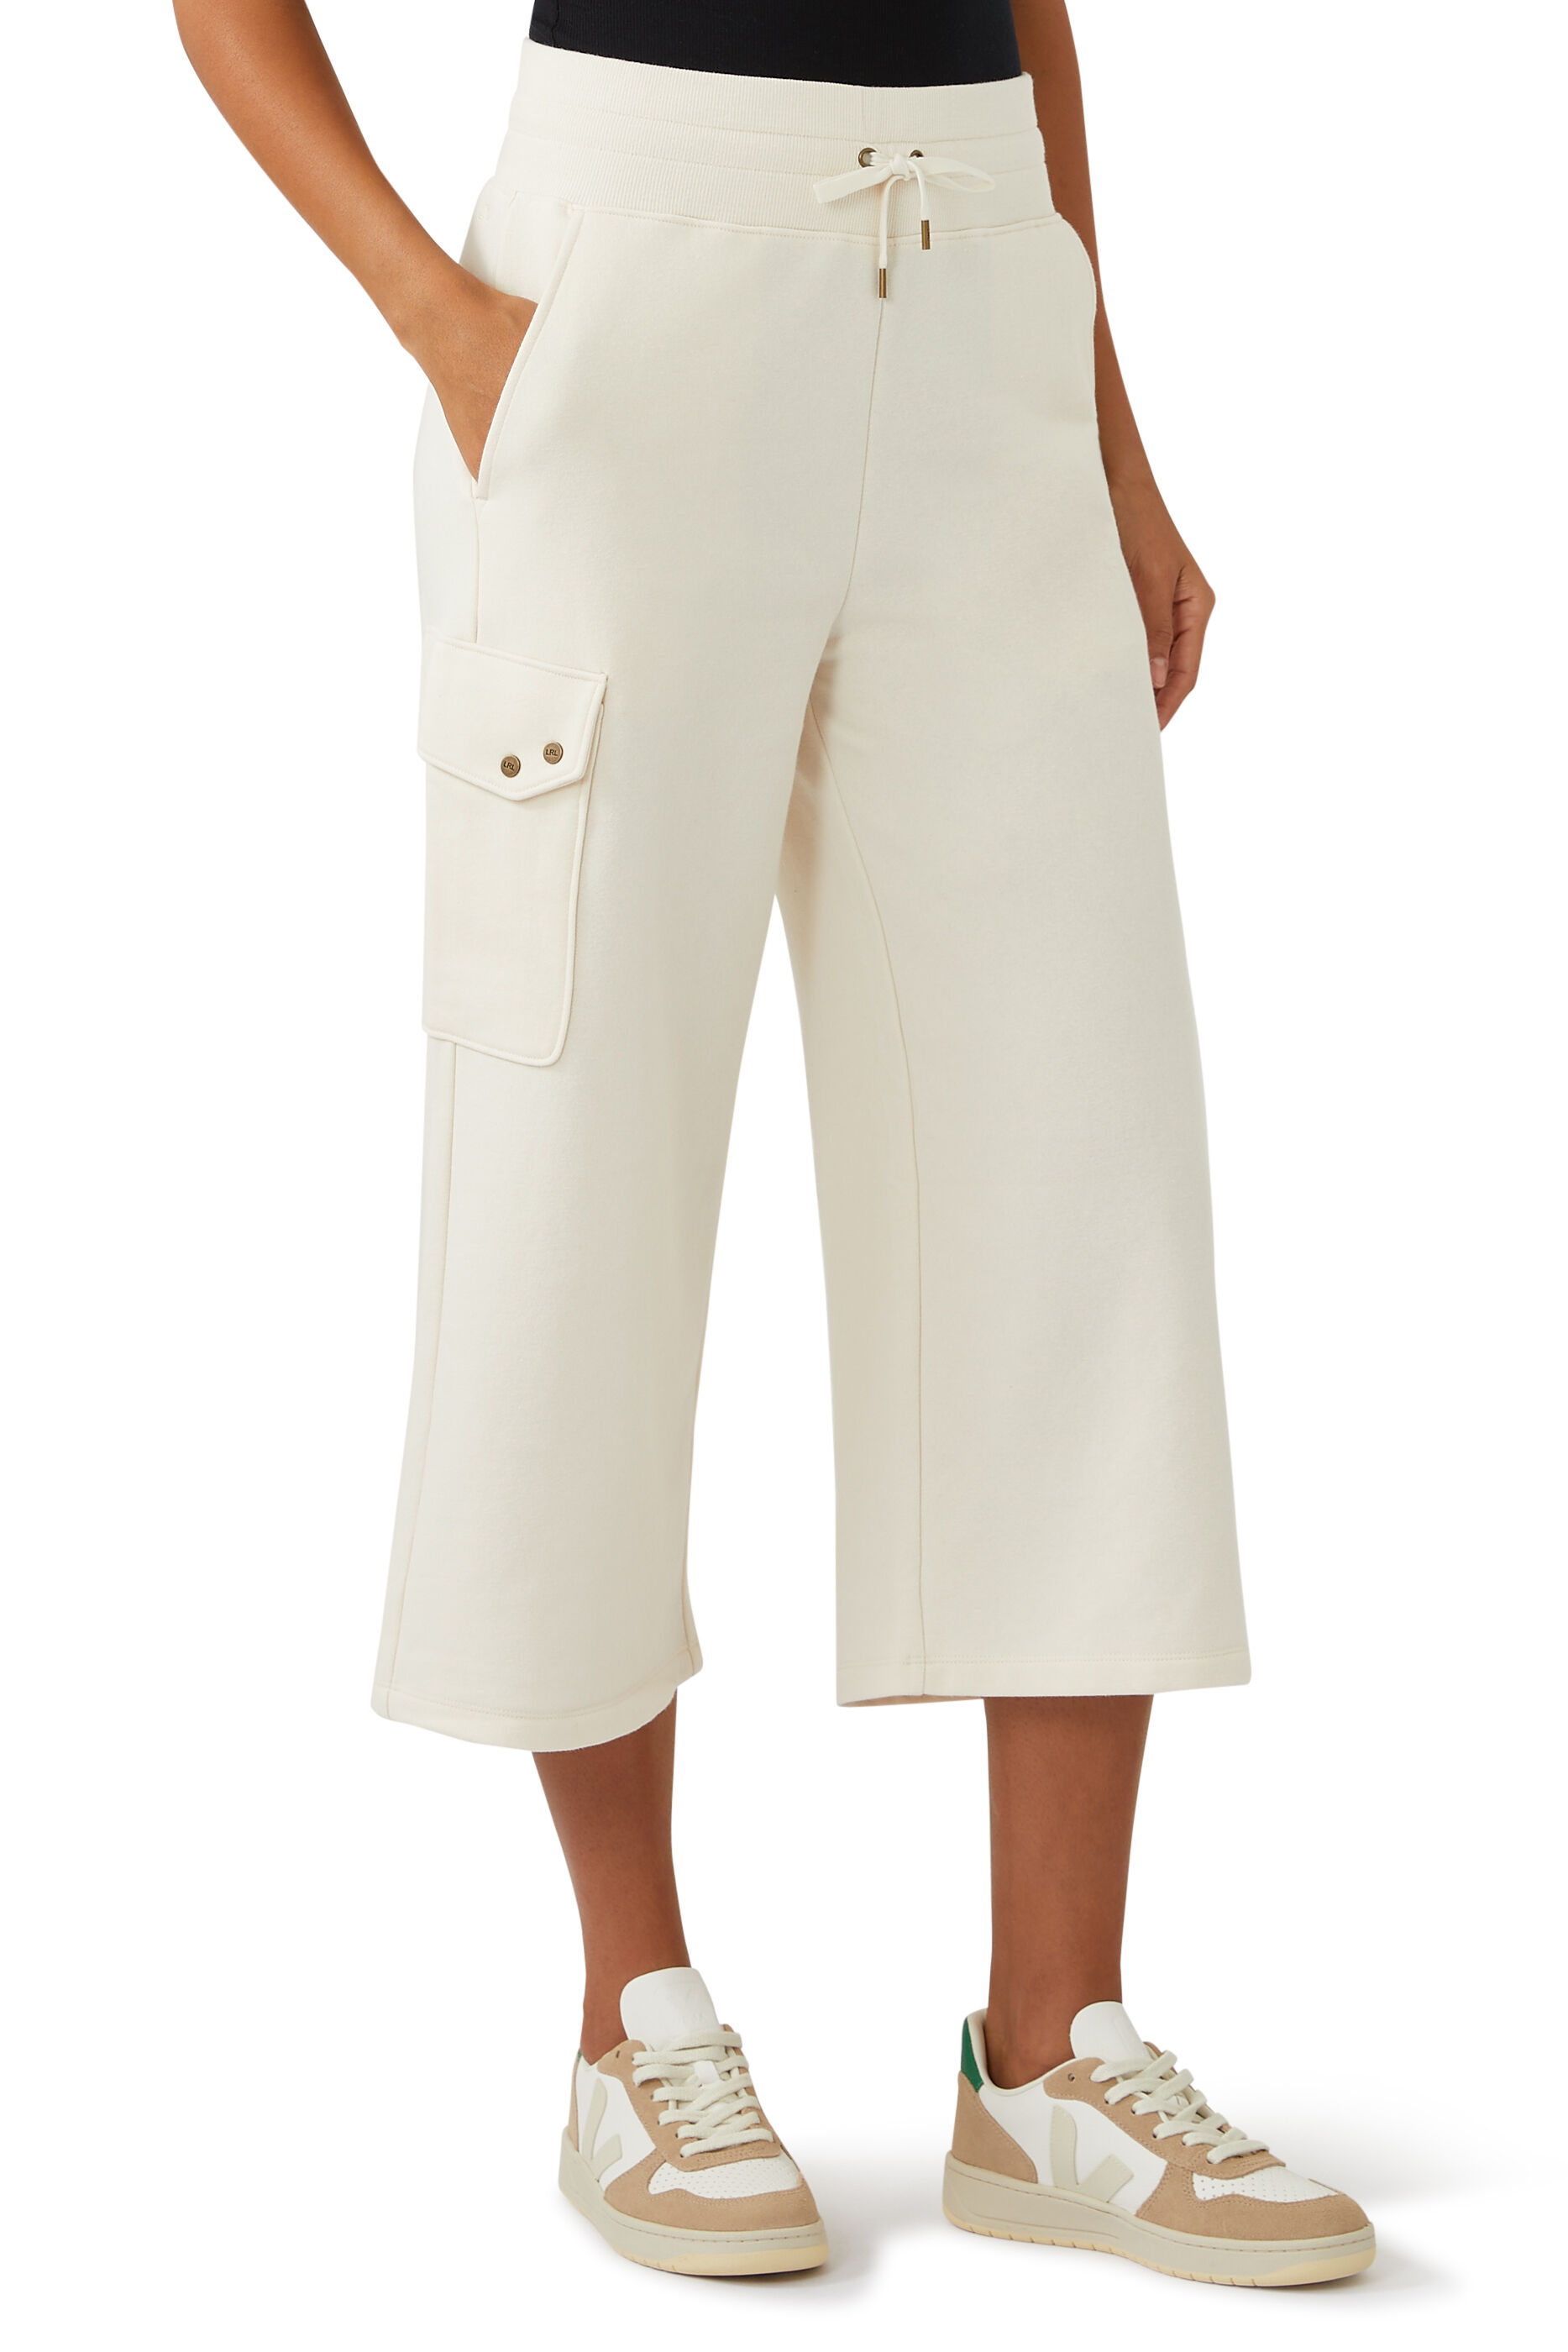 Bloomingdales Women Clothing Shorts Culottes Back Patch Pocket Culottes 